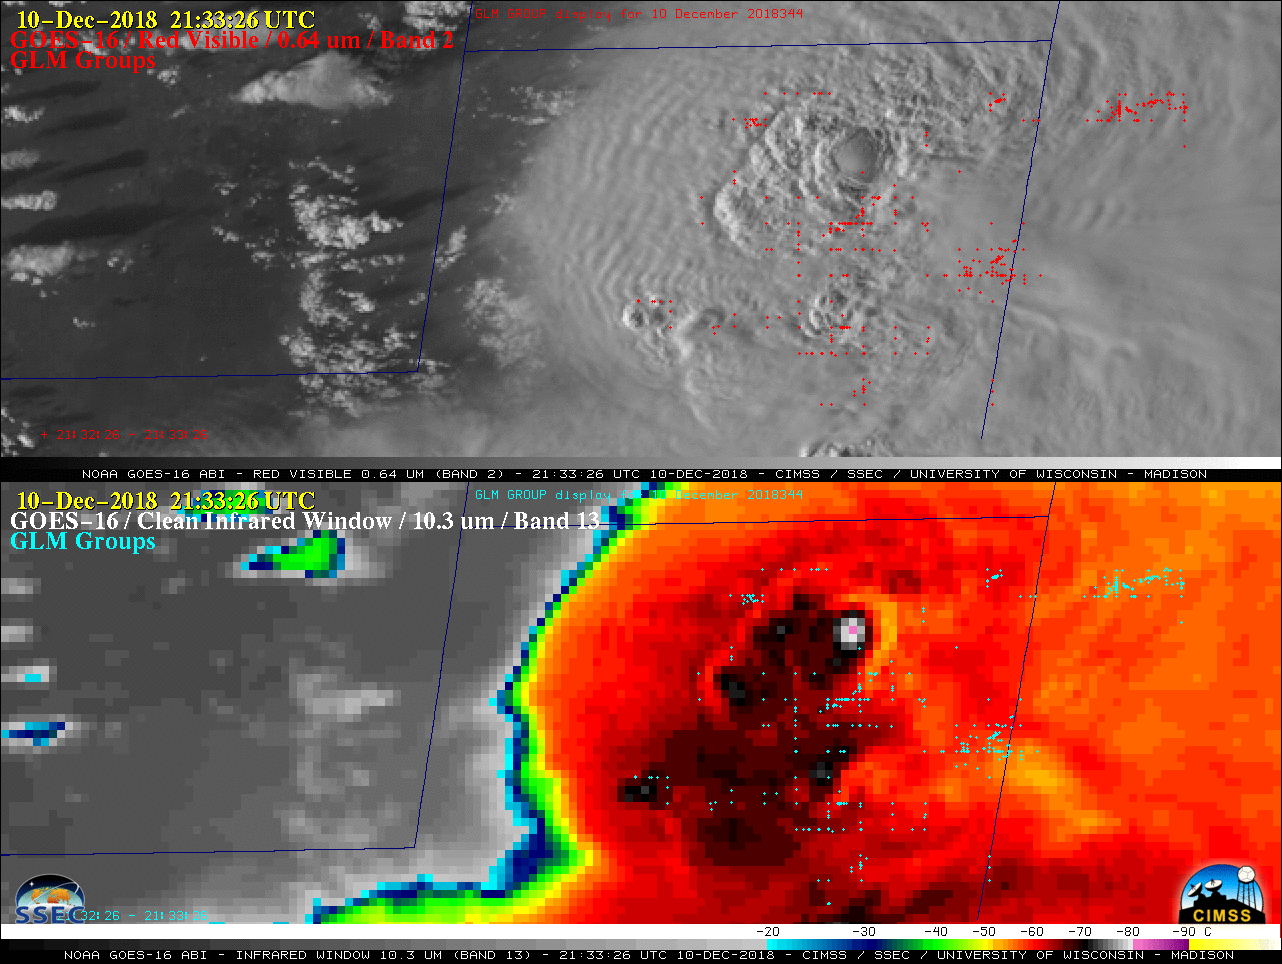 GOES-16 "Red" Visible (0.64 µm, top) with GLM Groups and "Clean" Infrared Window (10.3 µm, bottom) images [click to play MP4 animation]